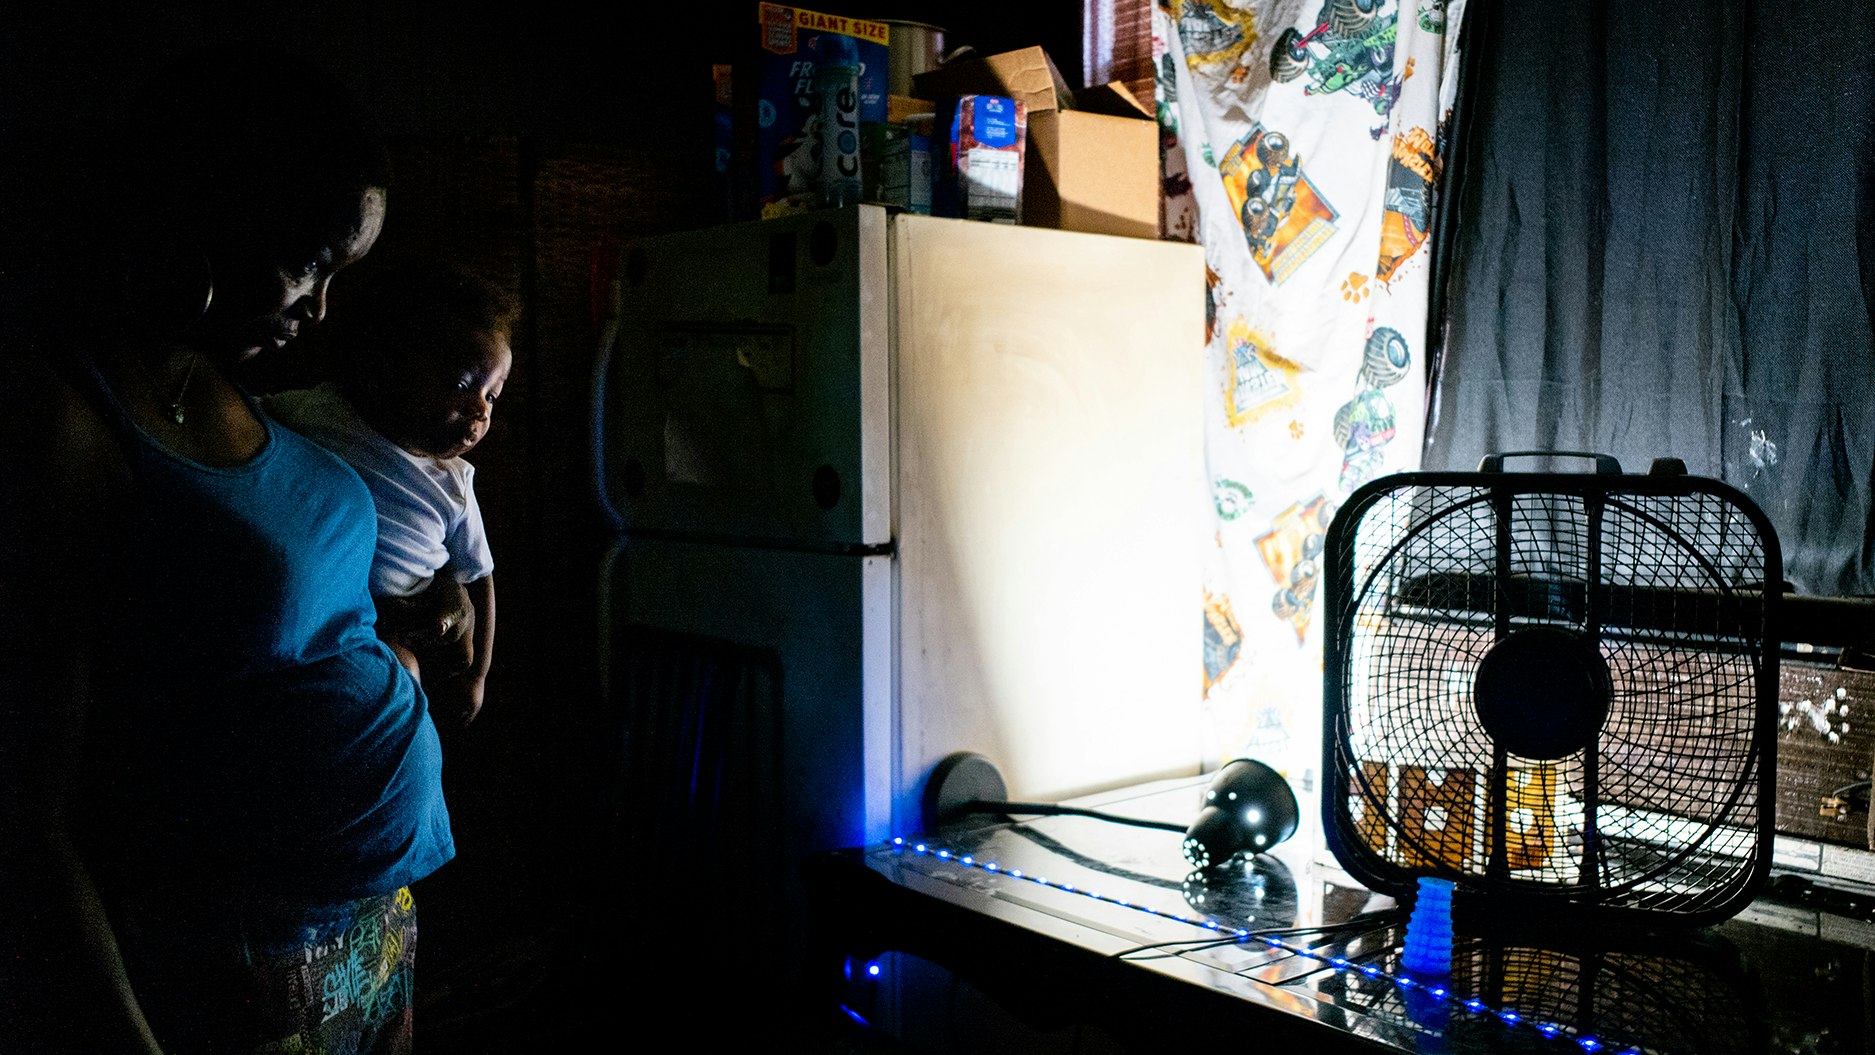 A mother holds her child near a window fan in her darkened home.